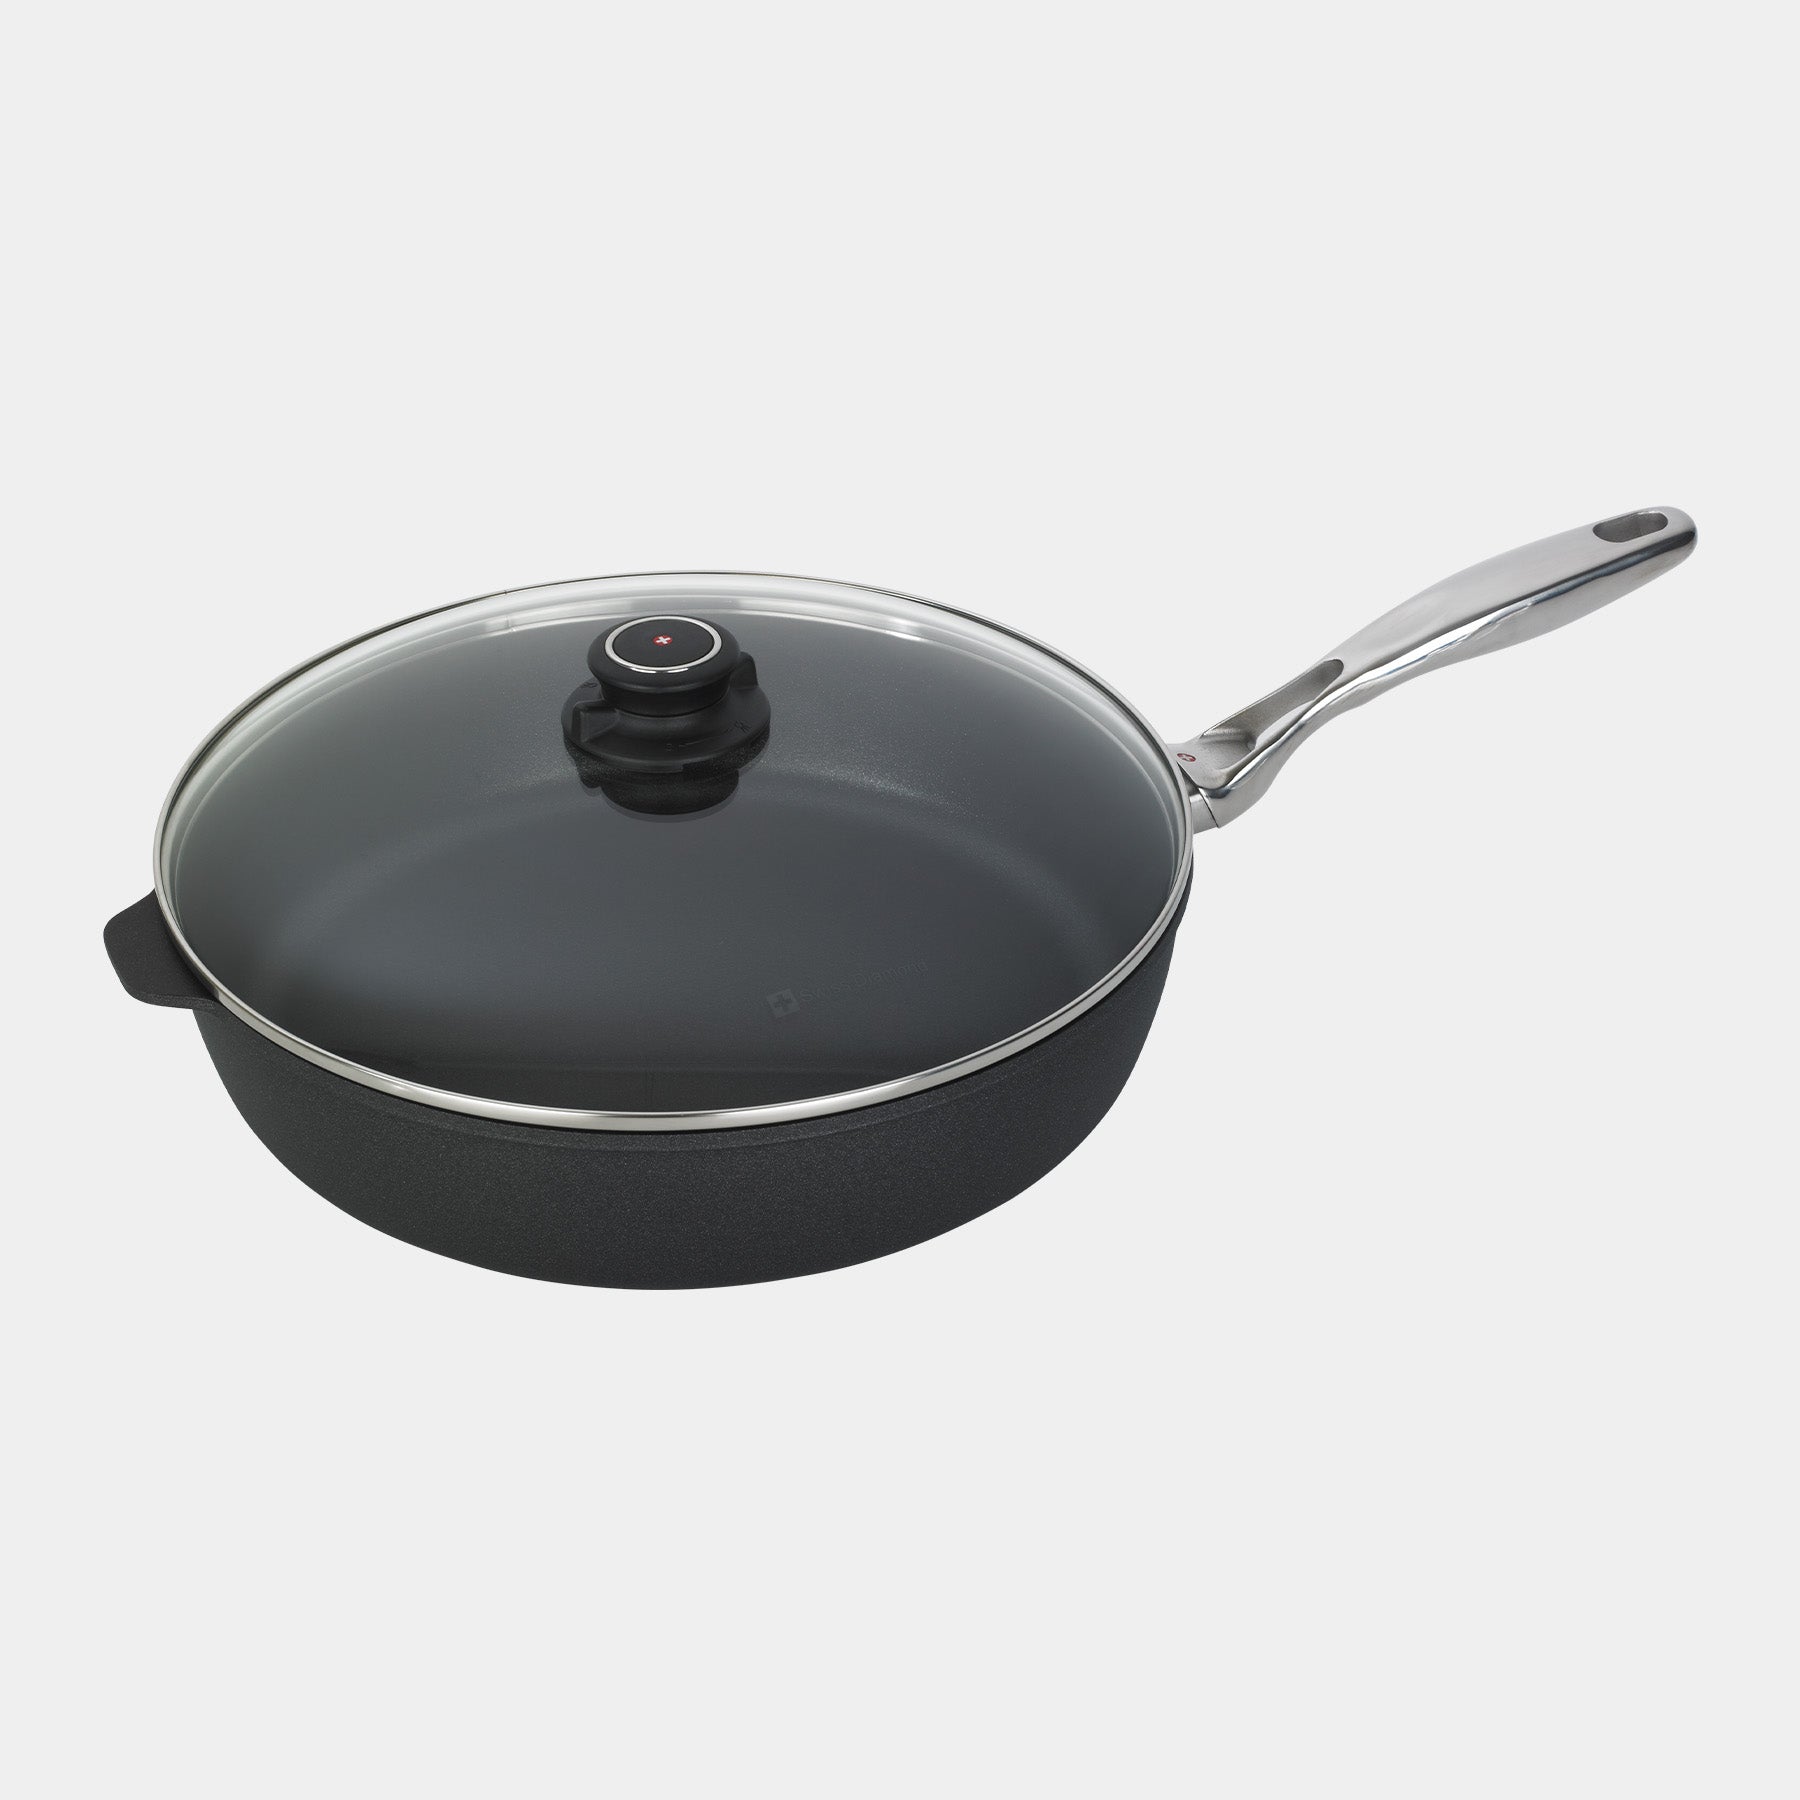 XD Nonstick 5.8 qt Saute Pan with Glass Lid - Induction